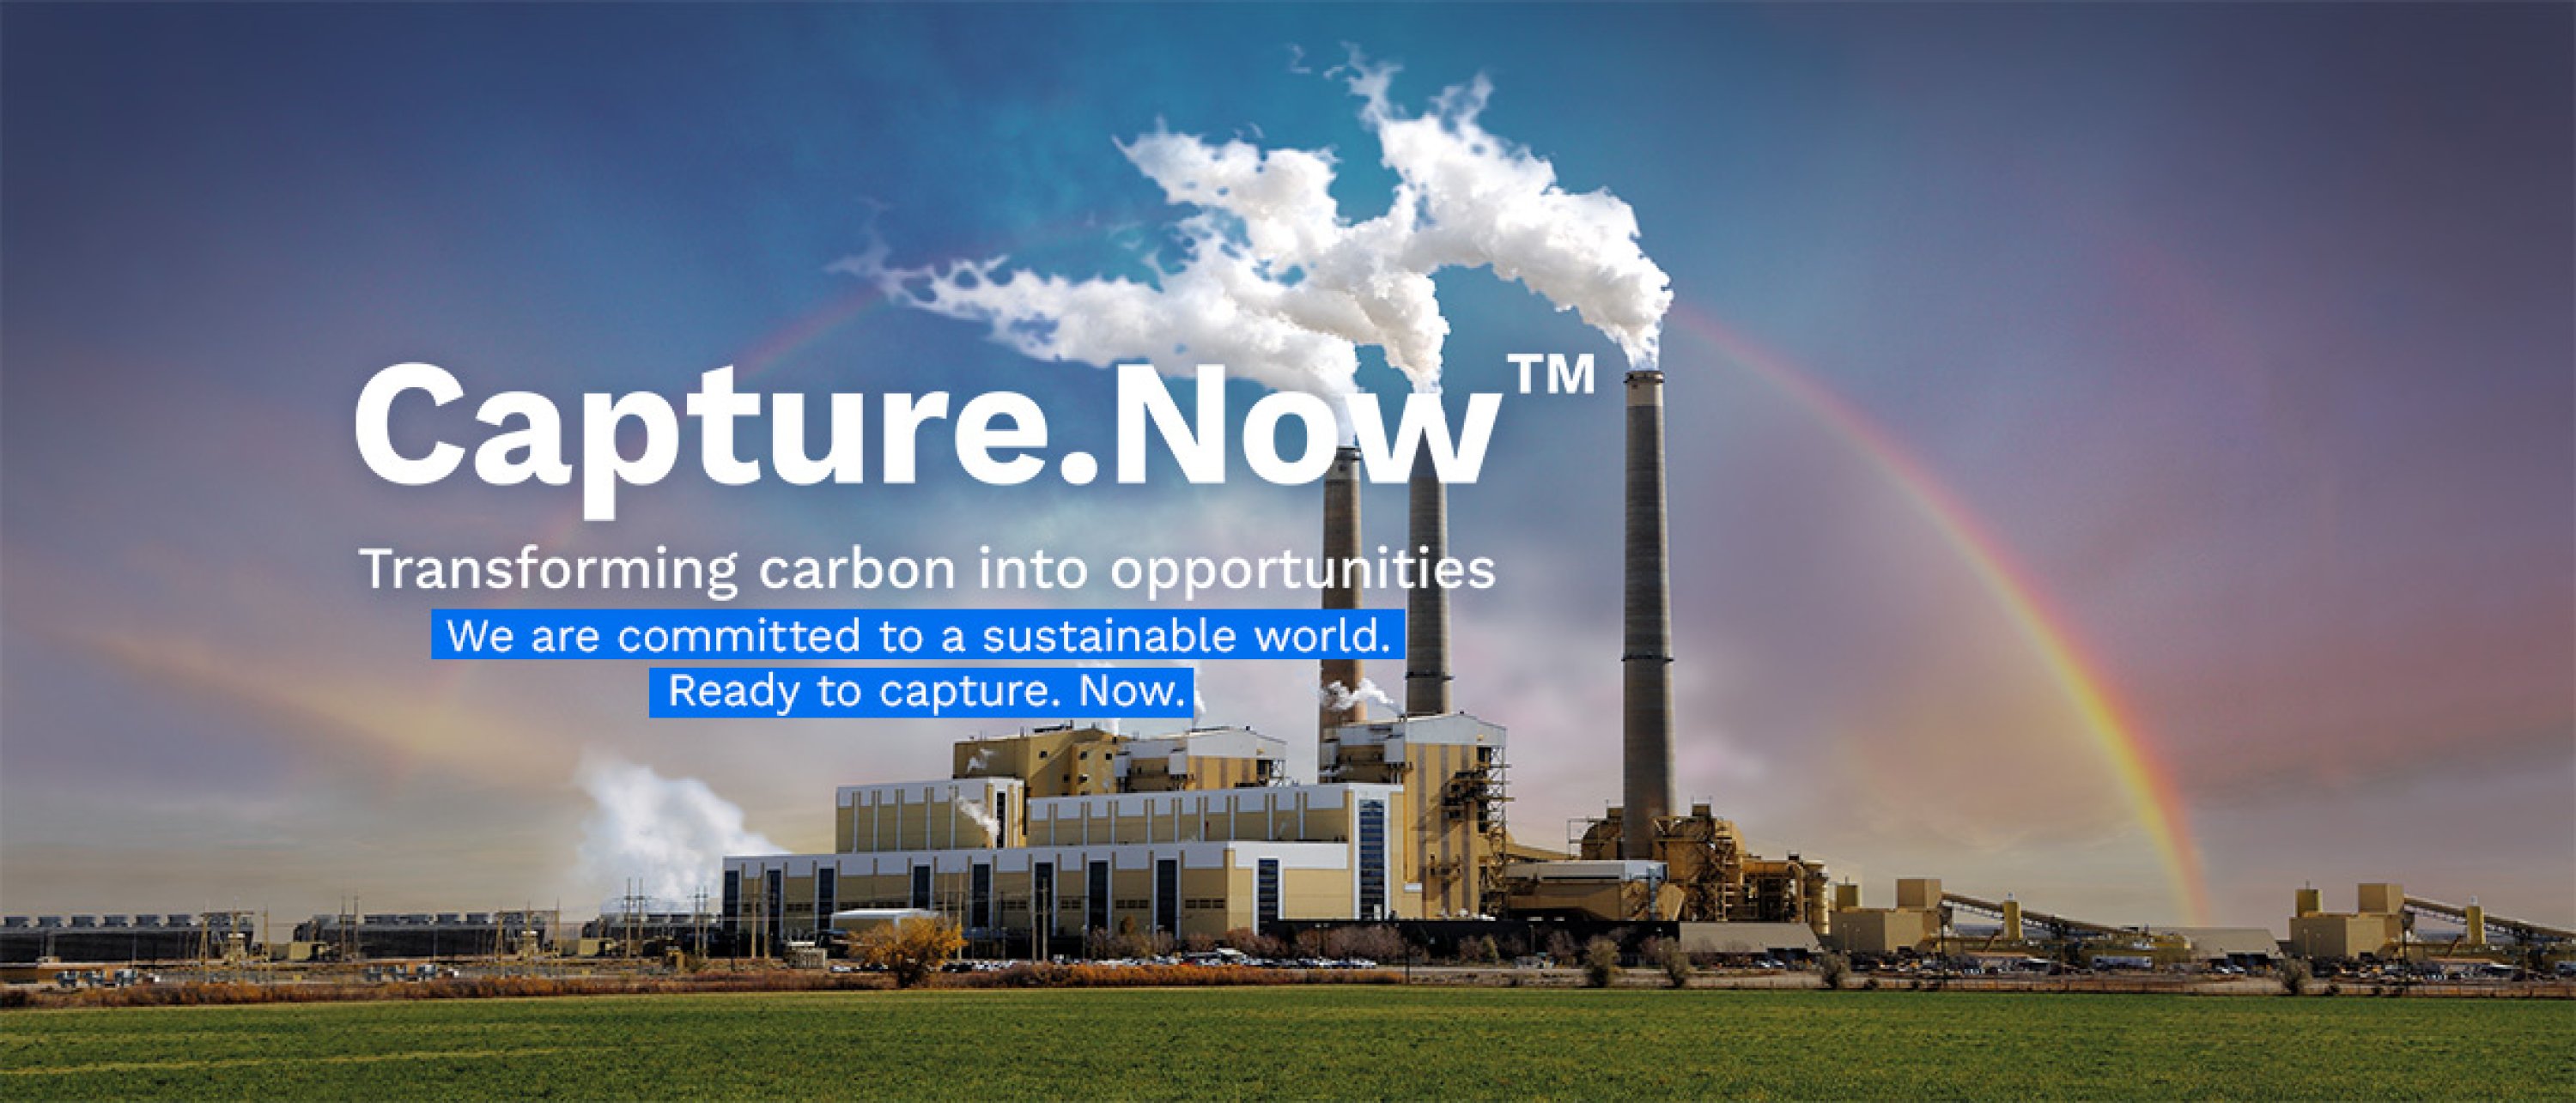 Carbon capture, utilization and storage sector solutions image